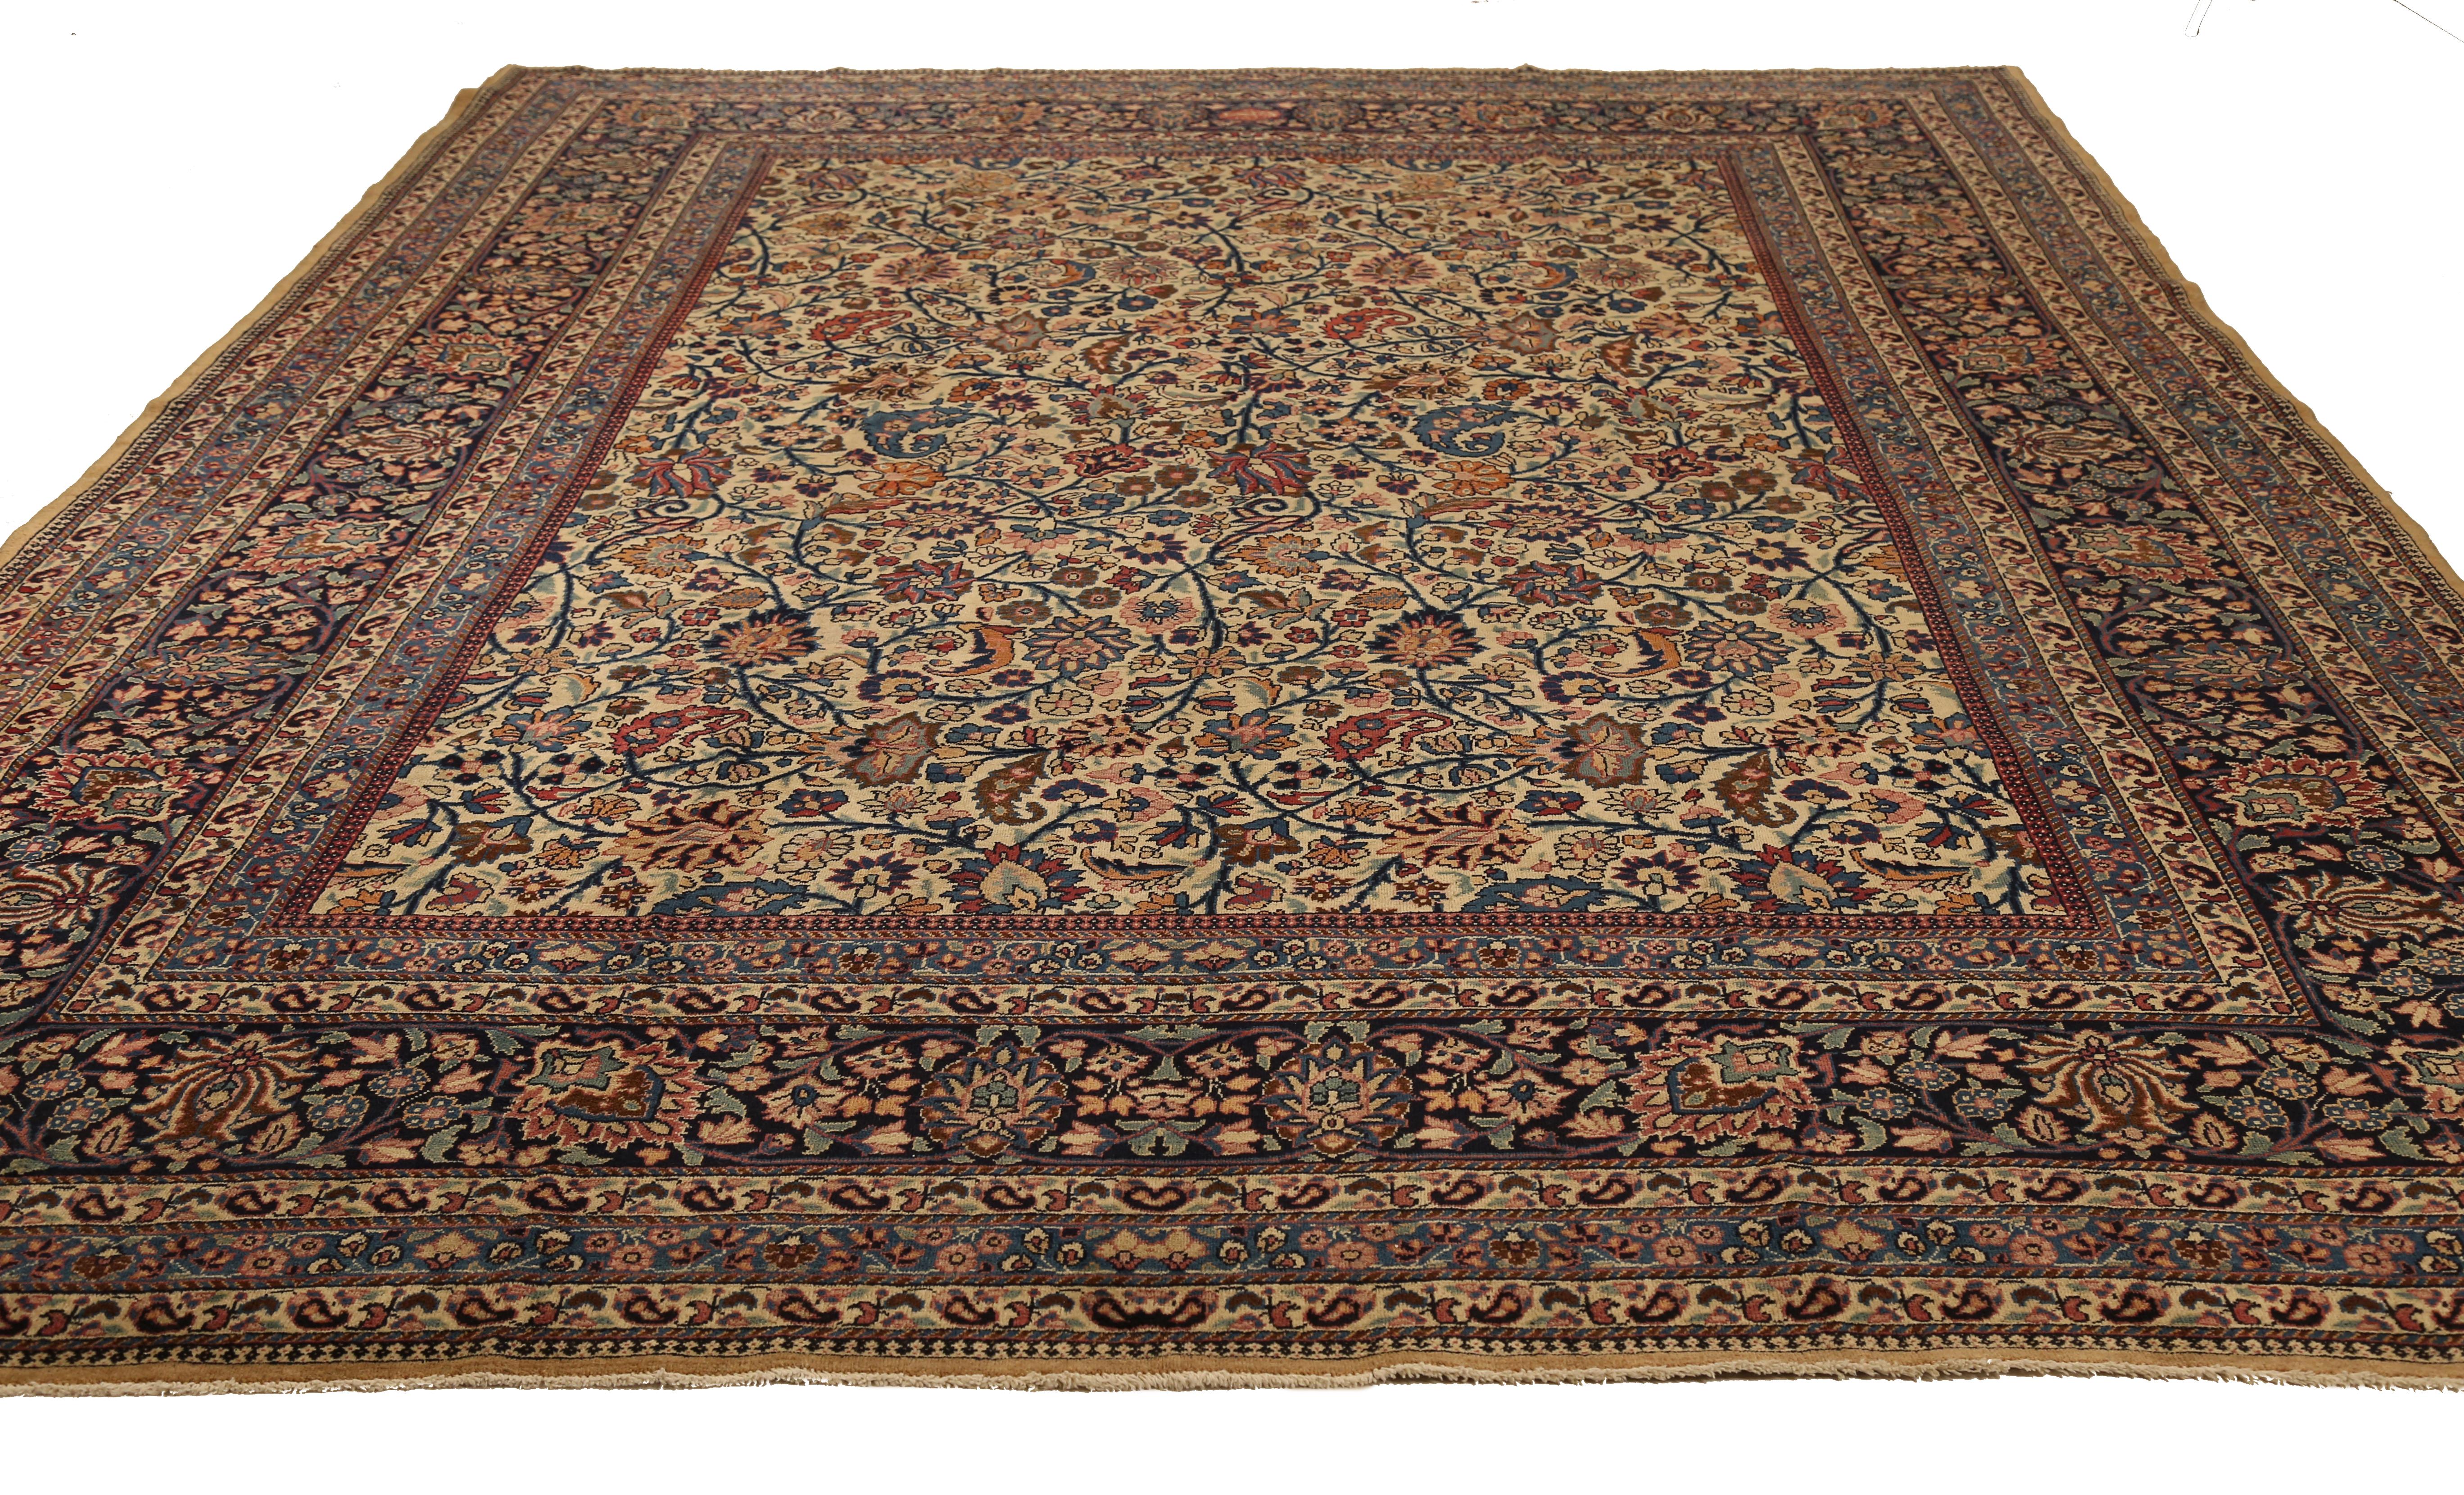 Mid-20th century hand knotted Persian area rug made from fine wool and all-natural vegetable dyes that are safe for people and pets. This beautiful piece features intricate floral patterns in various colors which Mashad rugs are known for. Persian